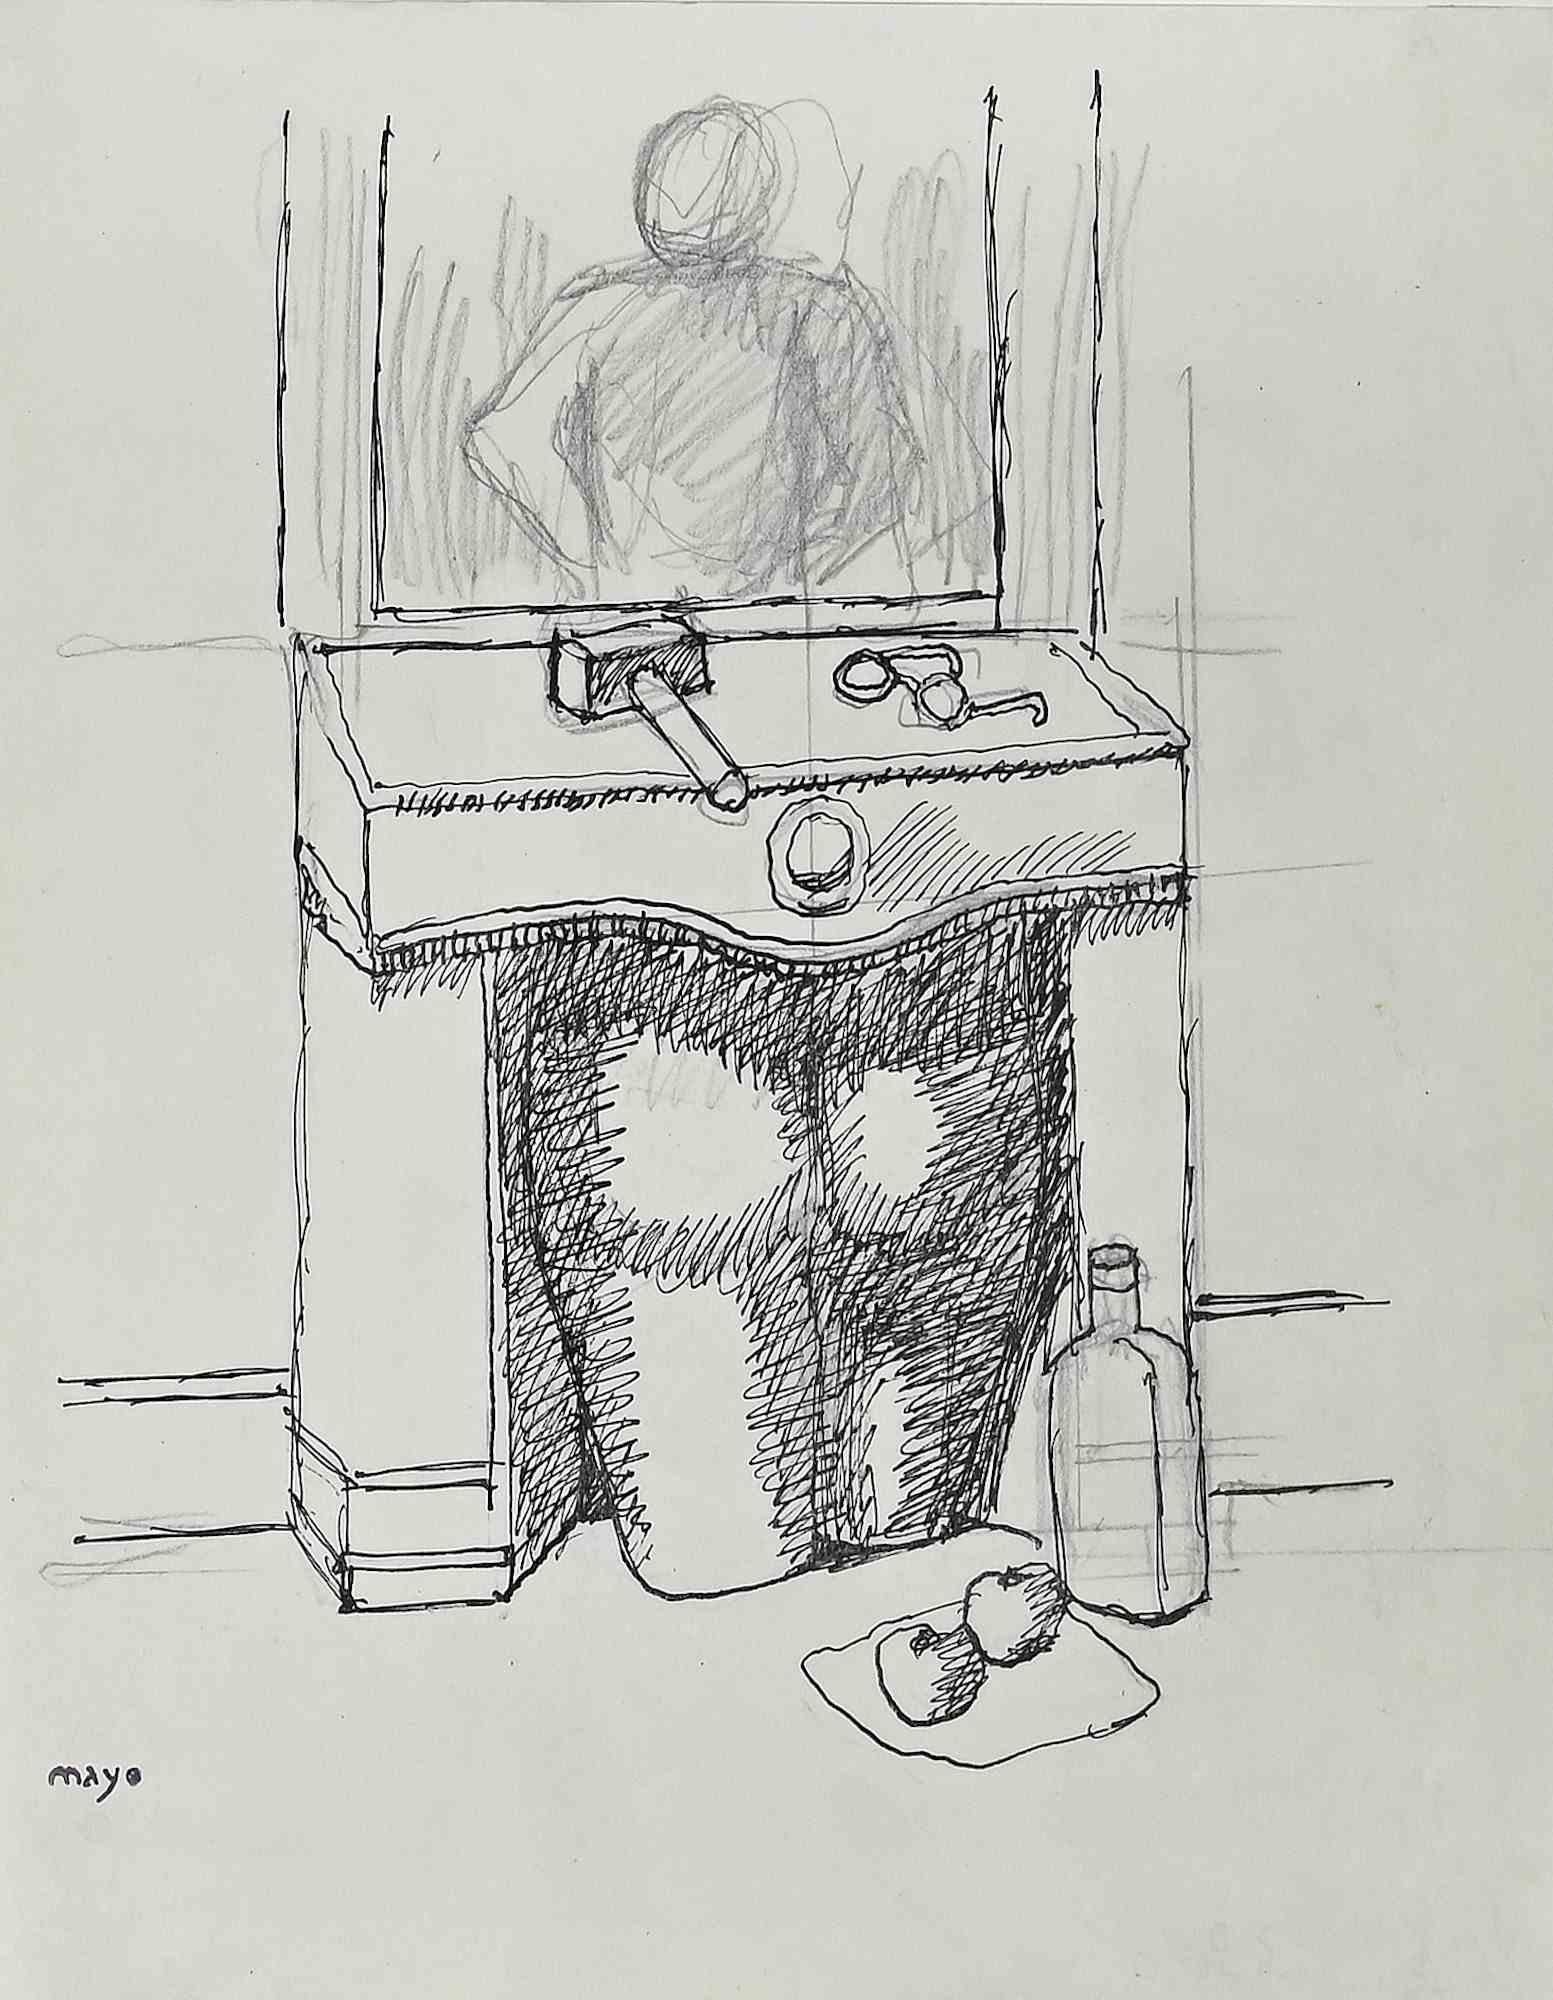 Man at Work - Drawing by Antoine Mayo - Late-20th century